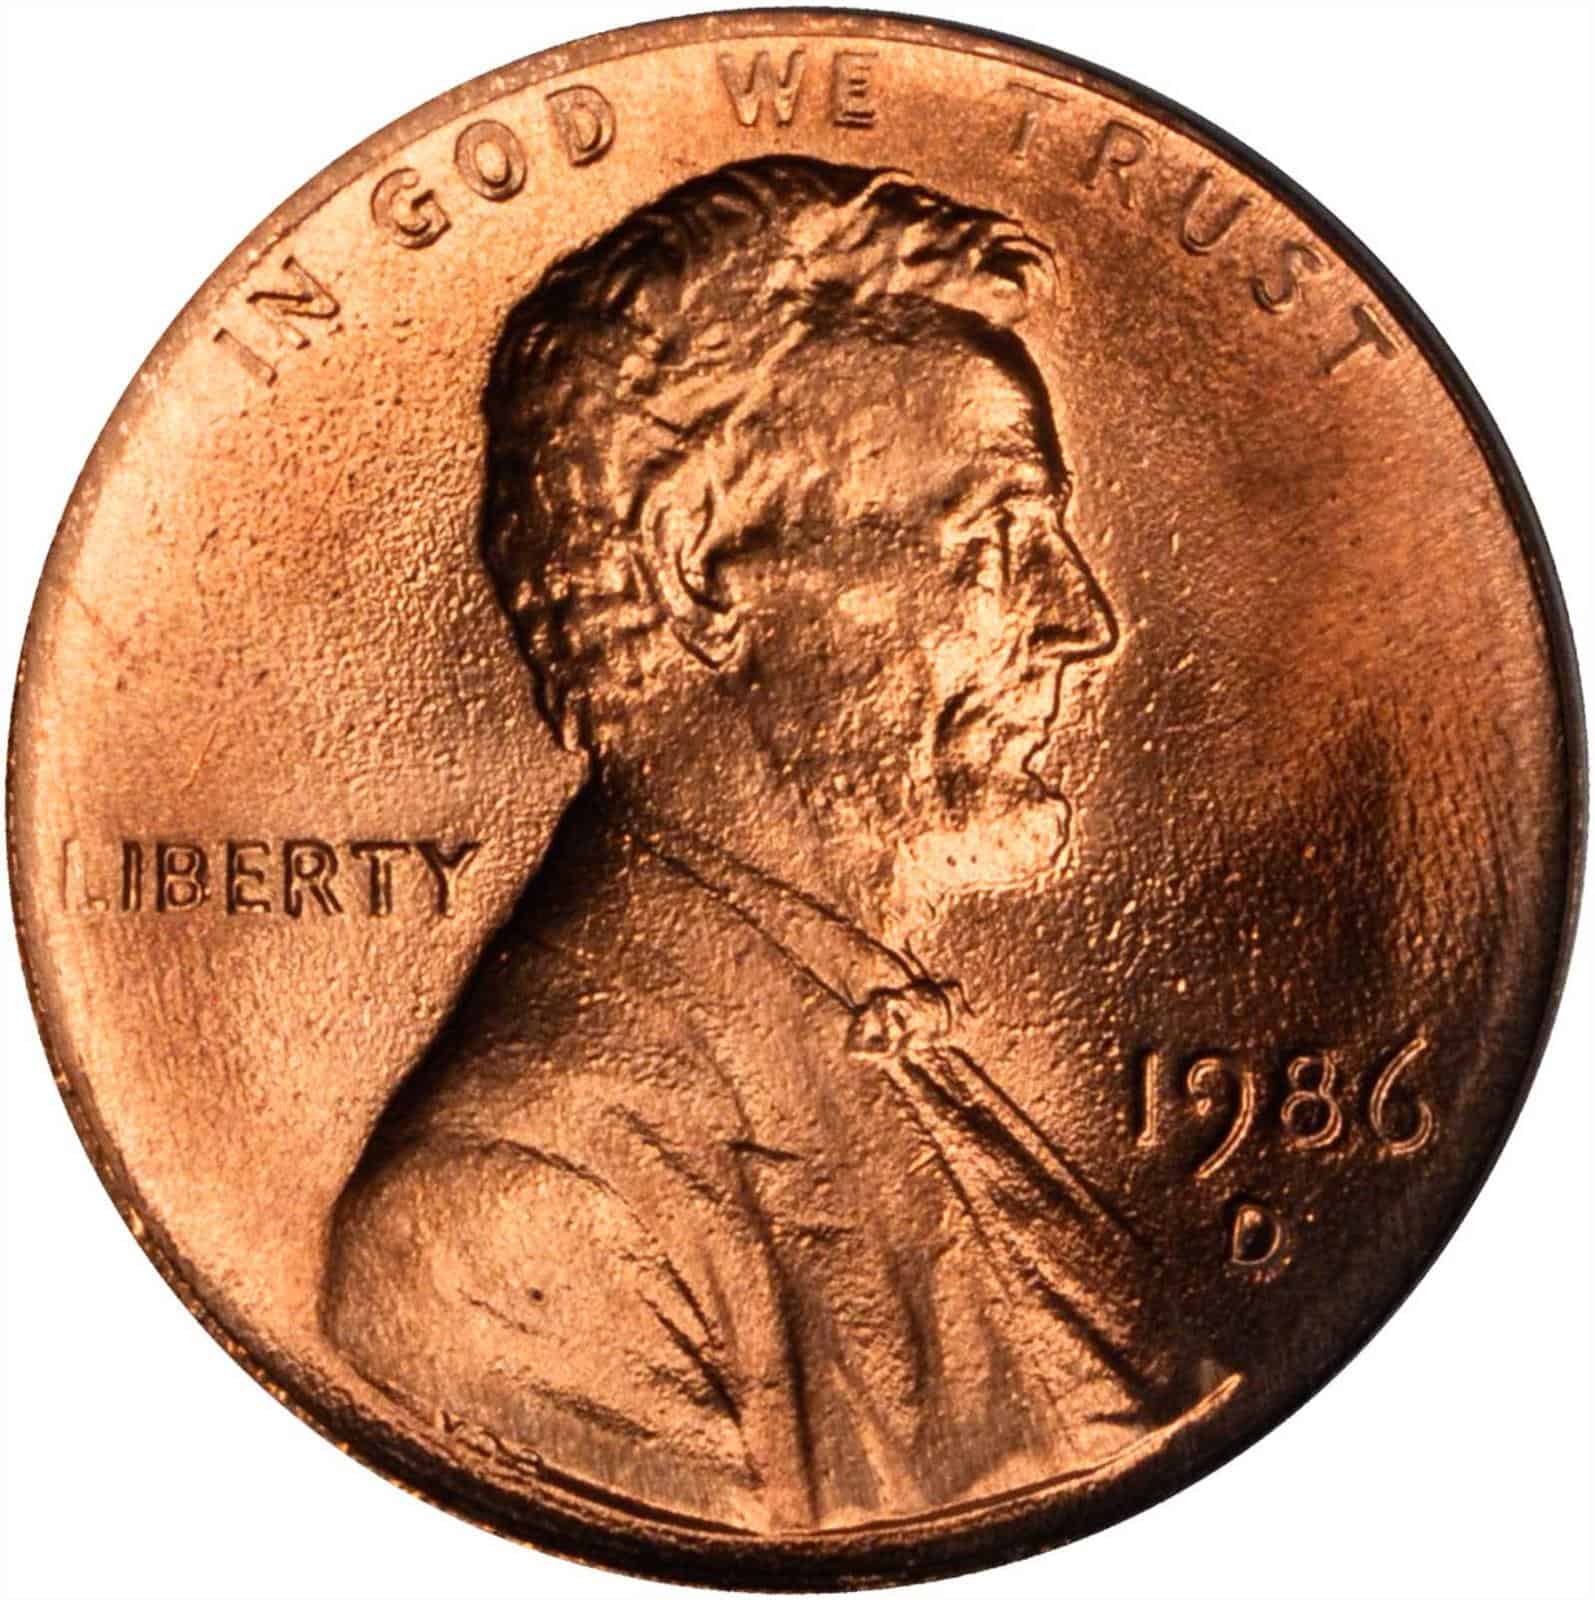 The obverse of the 1986 Memorial (Lincoln) penny